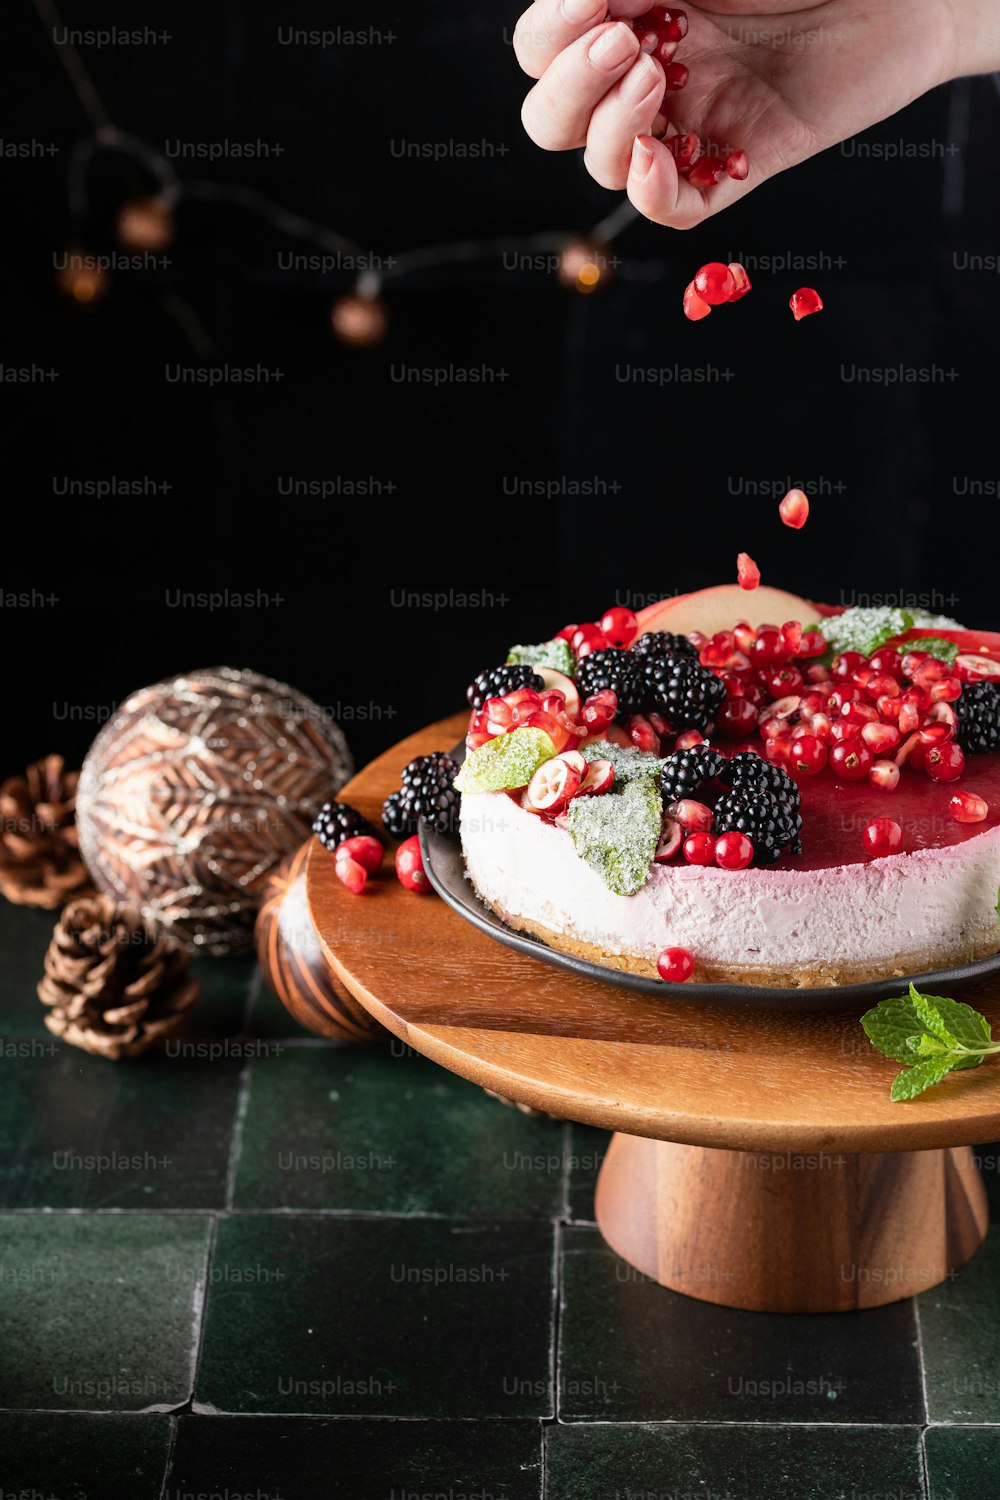 a person is sprinkling berries on a cake